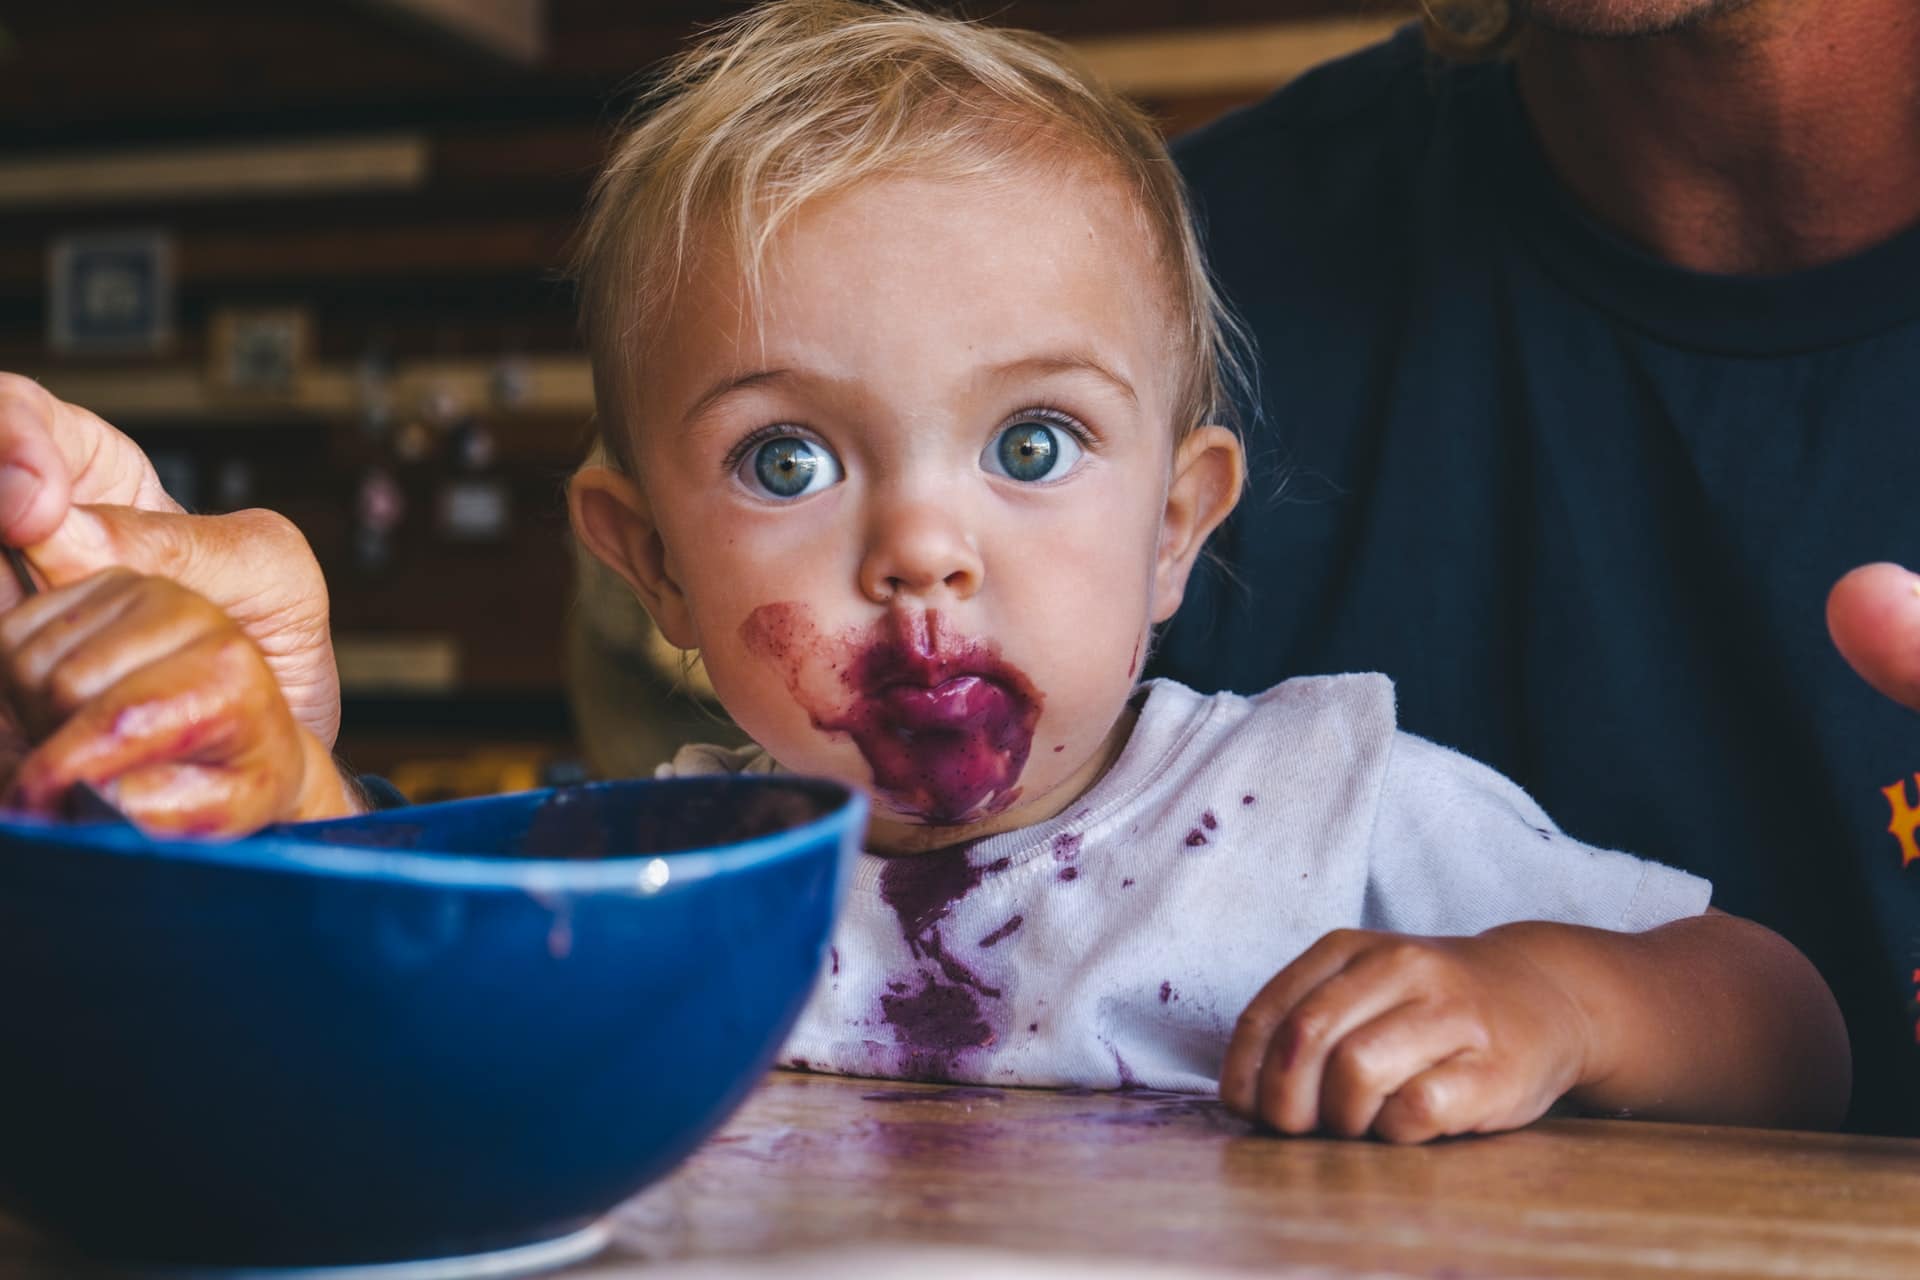 Teaching your baby to eat alone, our advice